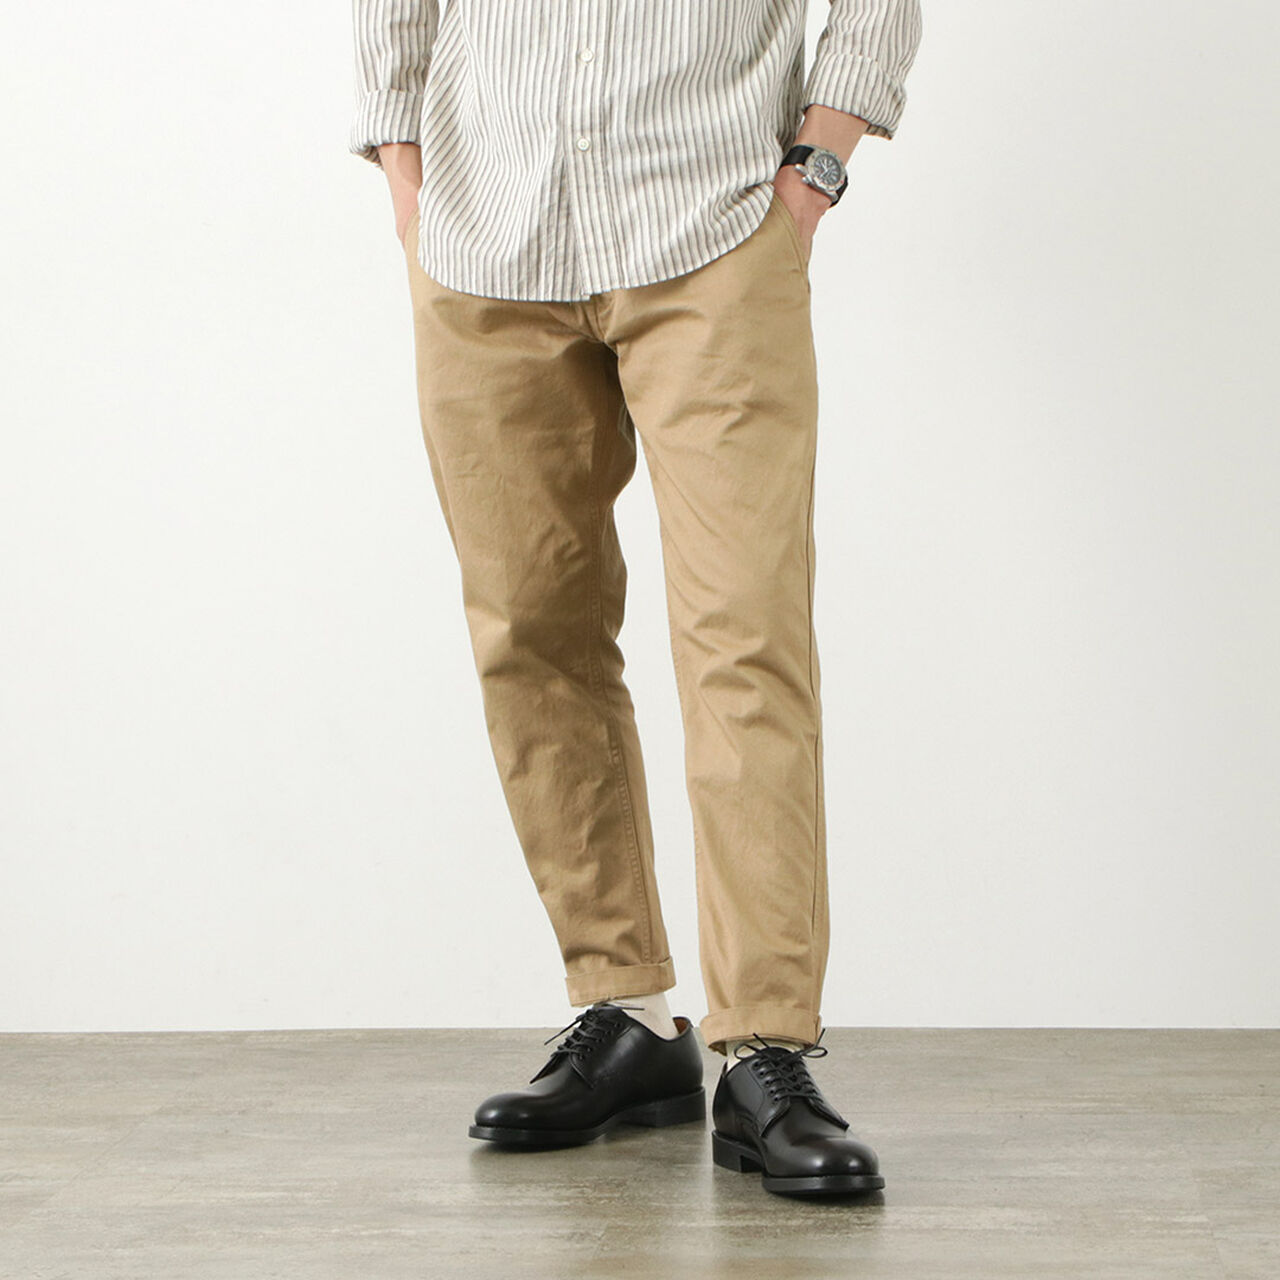 RJB1610 Special Order 40/3 High Count Twill Wide Tapered Vintage Chinos,Beige, large image number 0